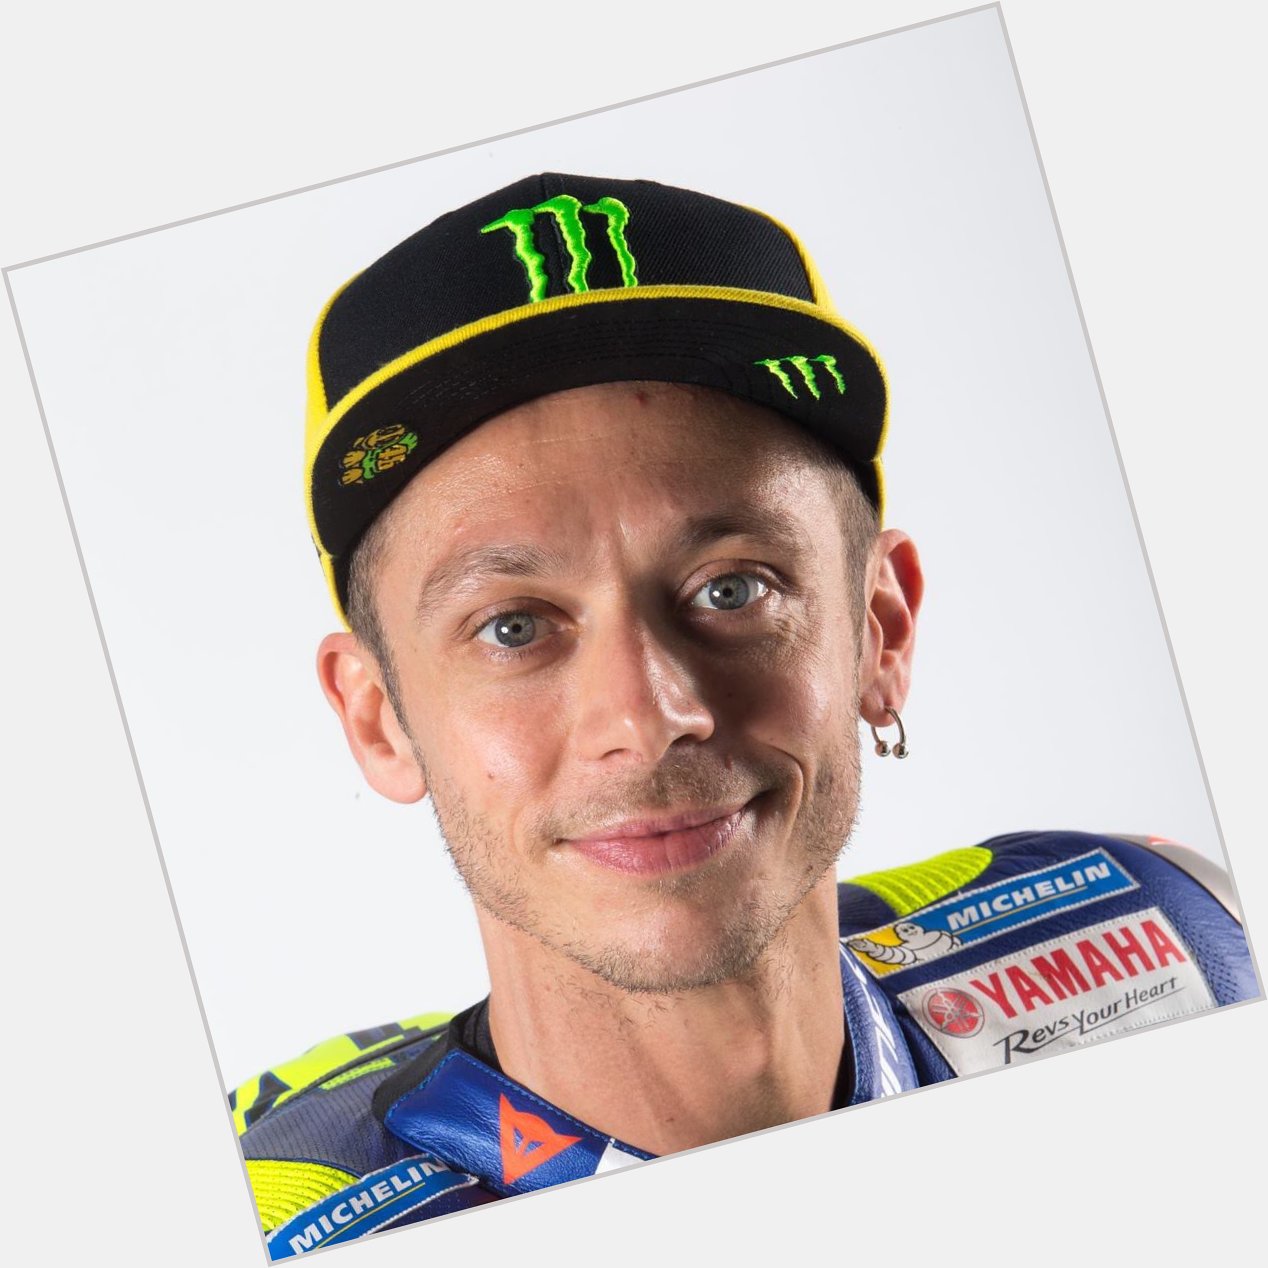 Wishing you a happy birthday to the legend,Valentino Rossi  